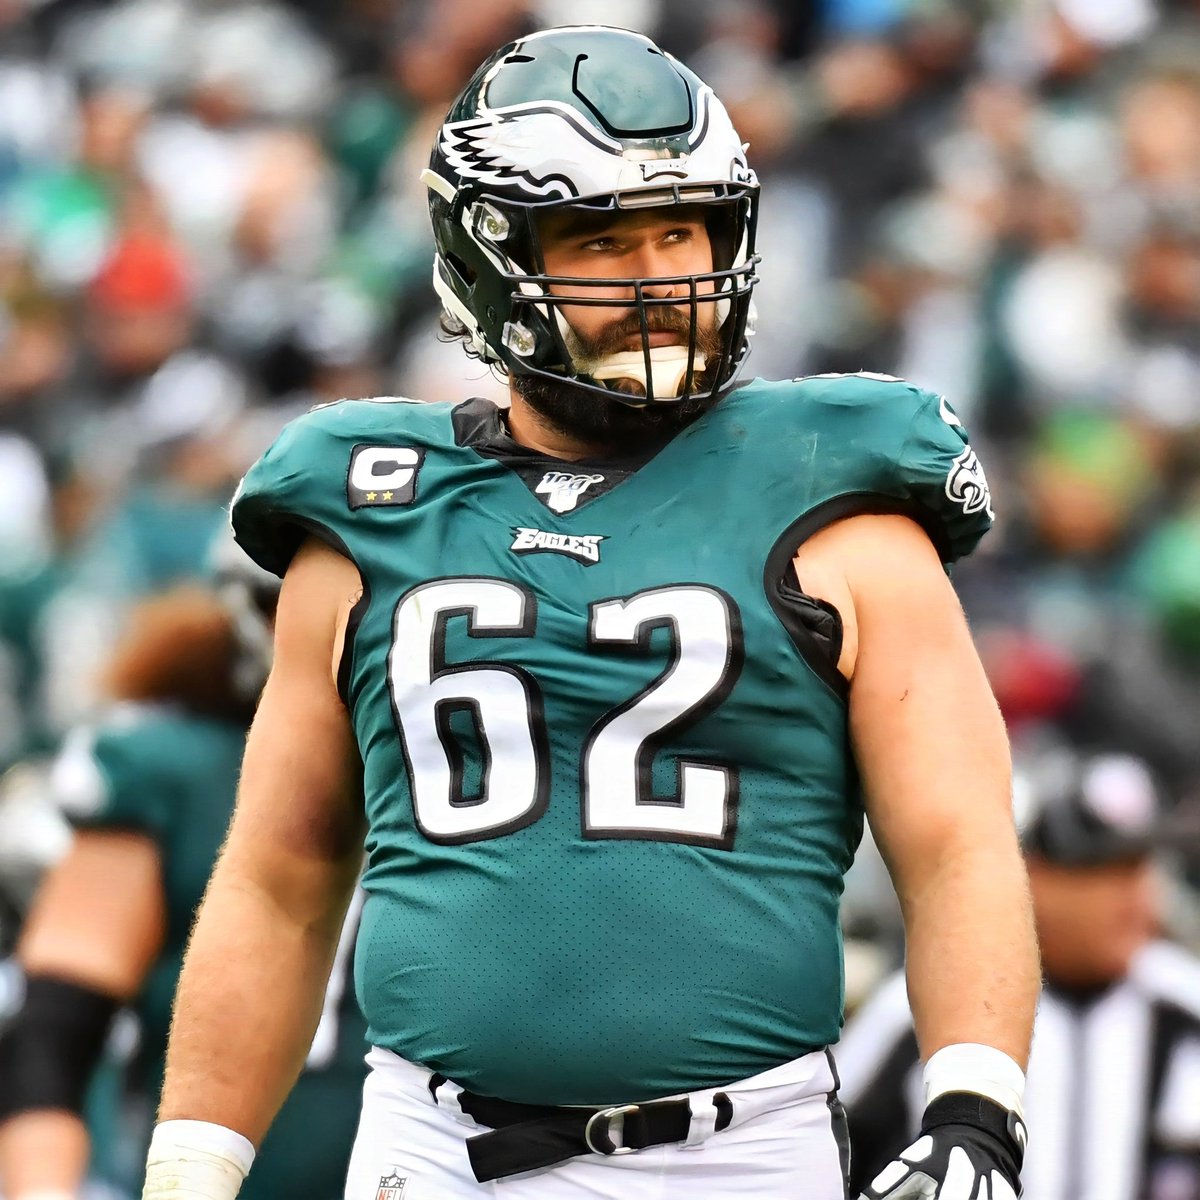 Keep one #Eagles player but you lose the other two:

A.J. Brown
Haason Reddick
Jason Kelce

Who are you keeping?